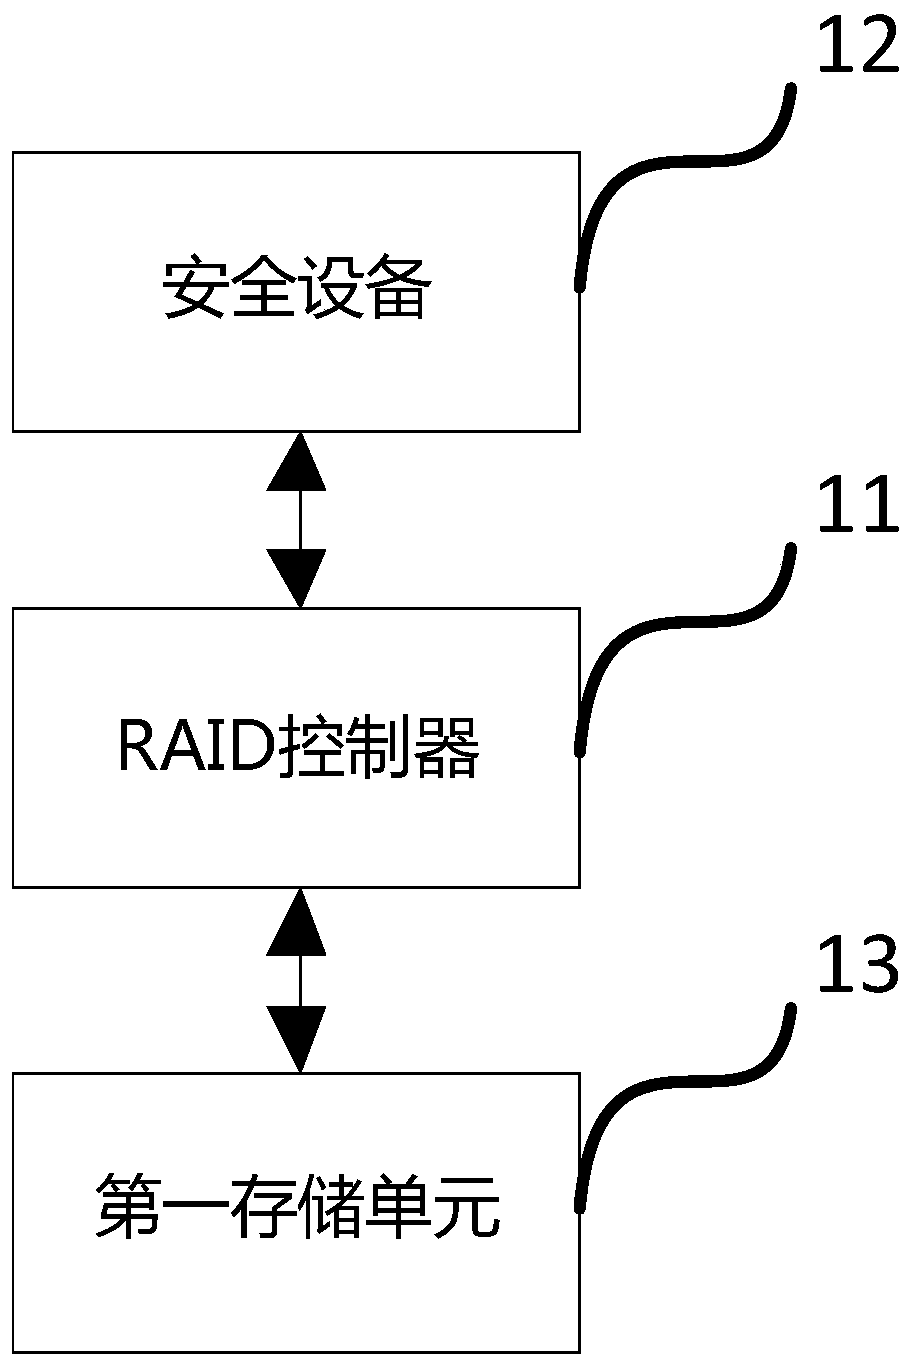 A kind of RAID hardware encryption device and method